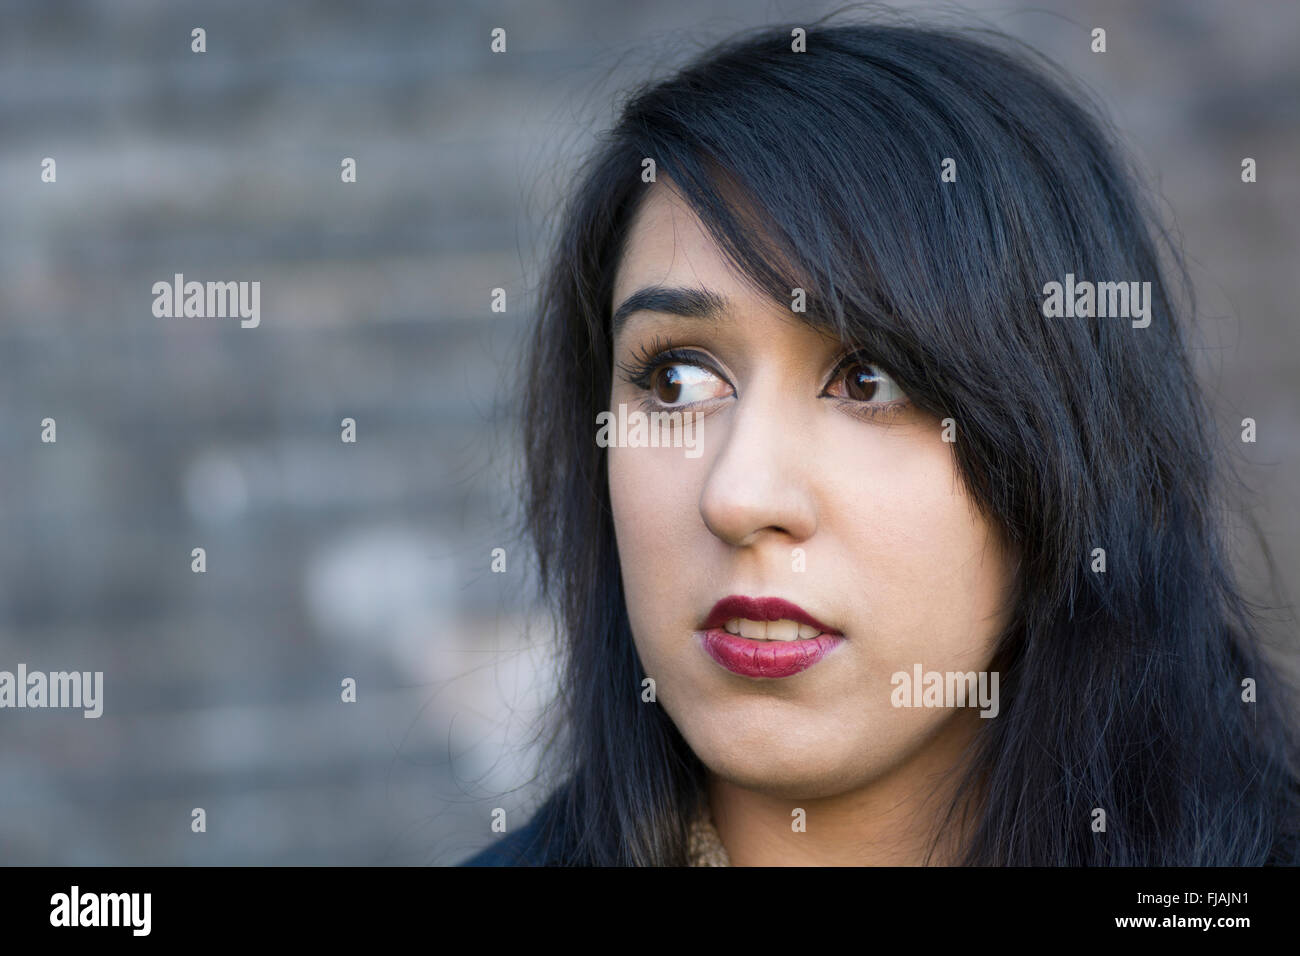 Scared young woman looking away outdoors Stock Photo